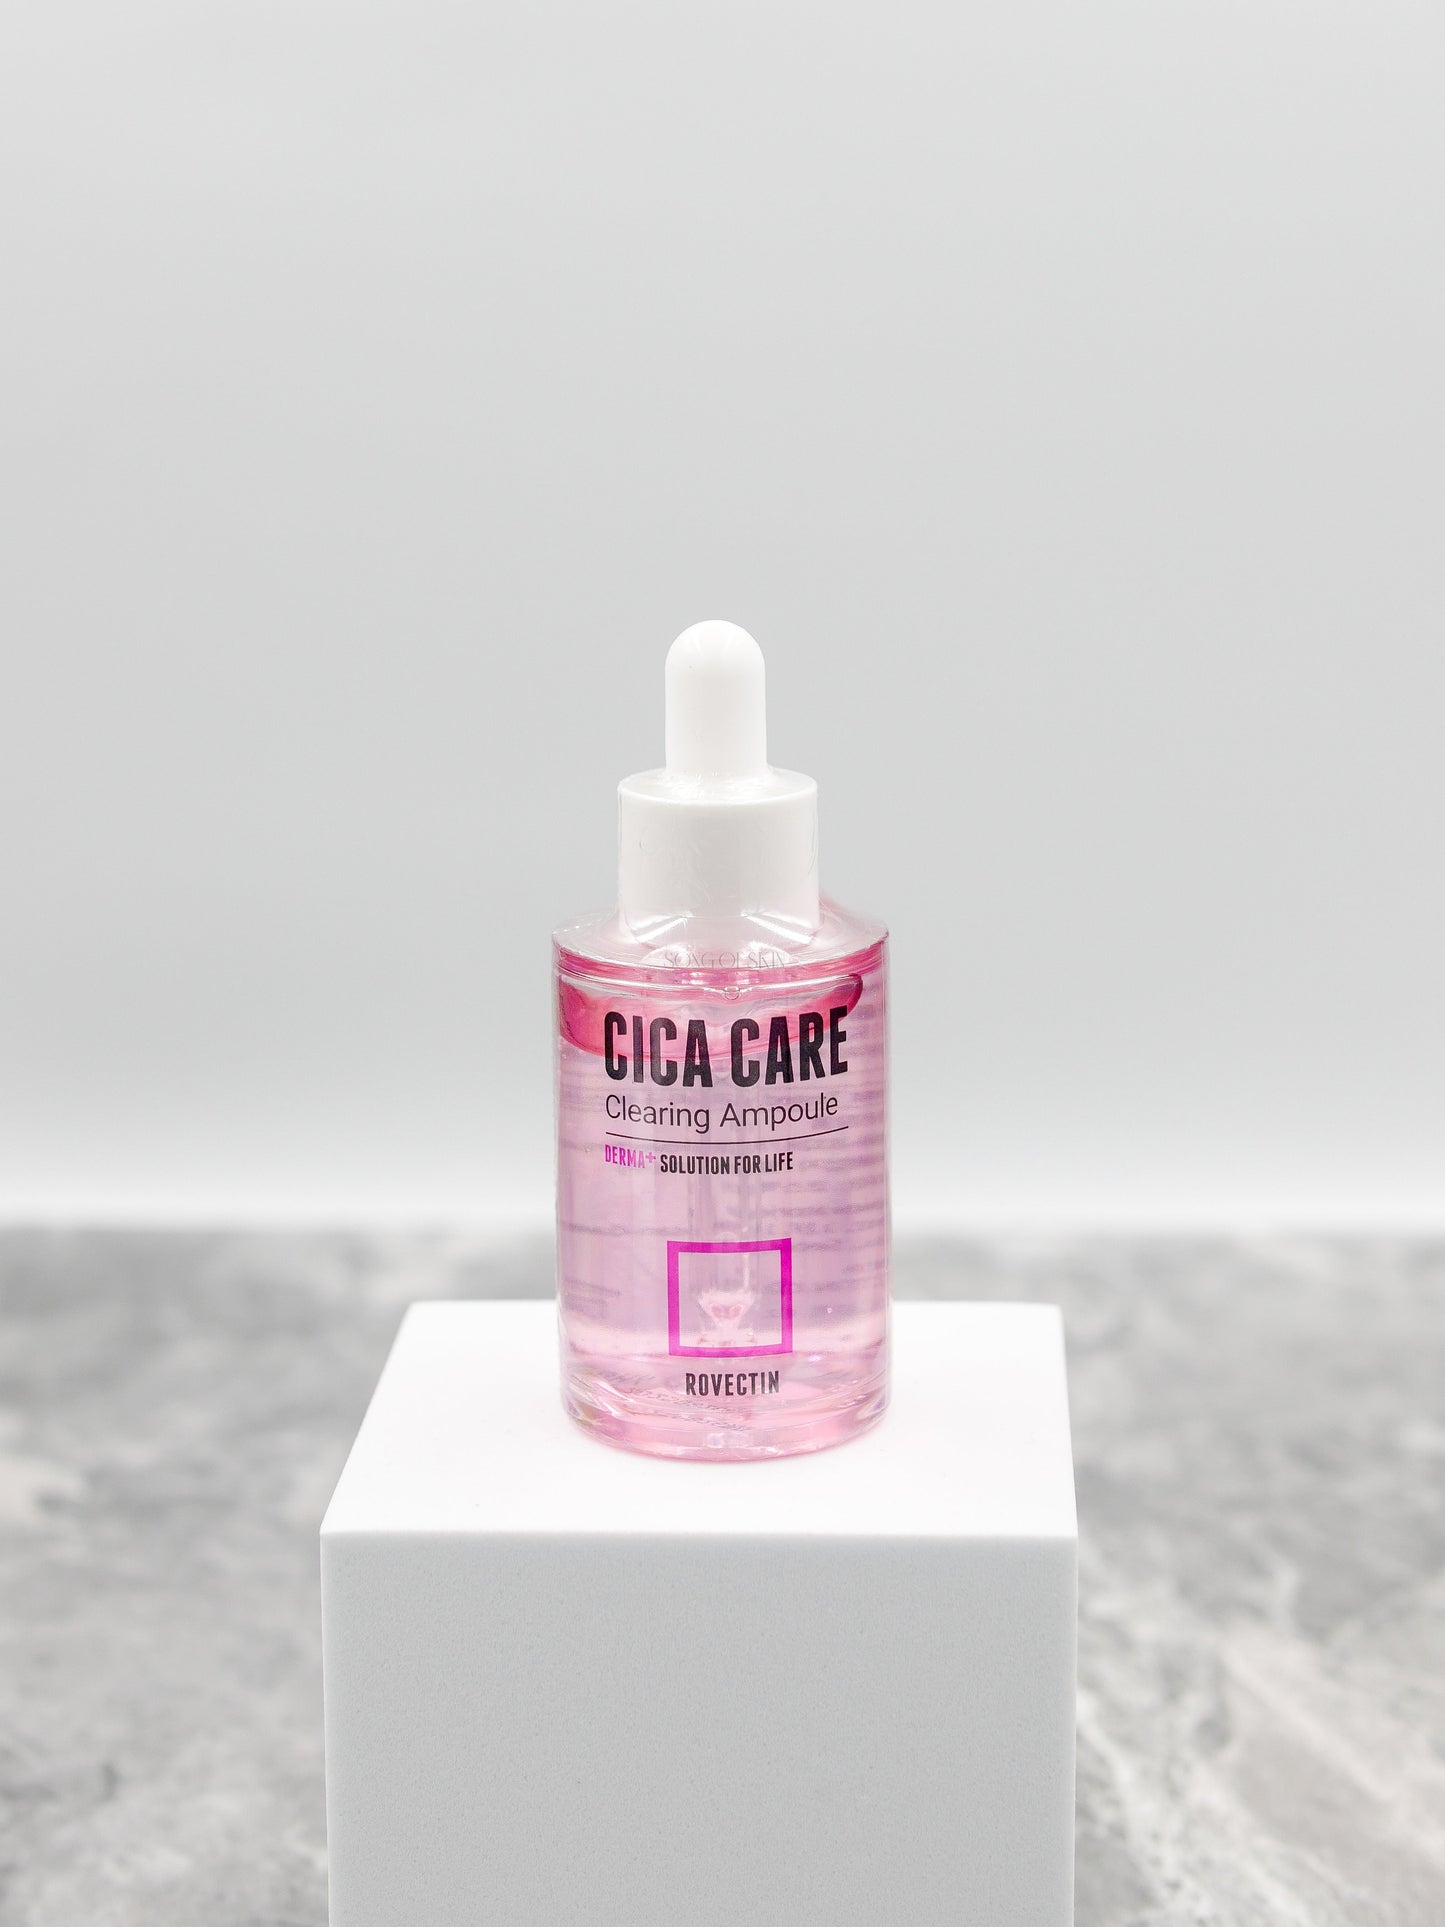 Rovectin Skin Essentials Cica Care Clearing Ampoule